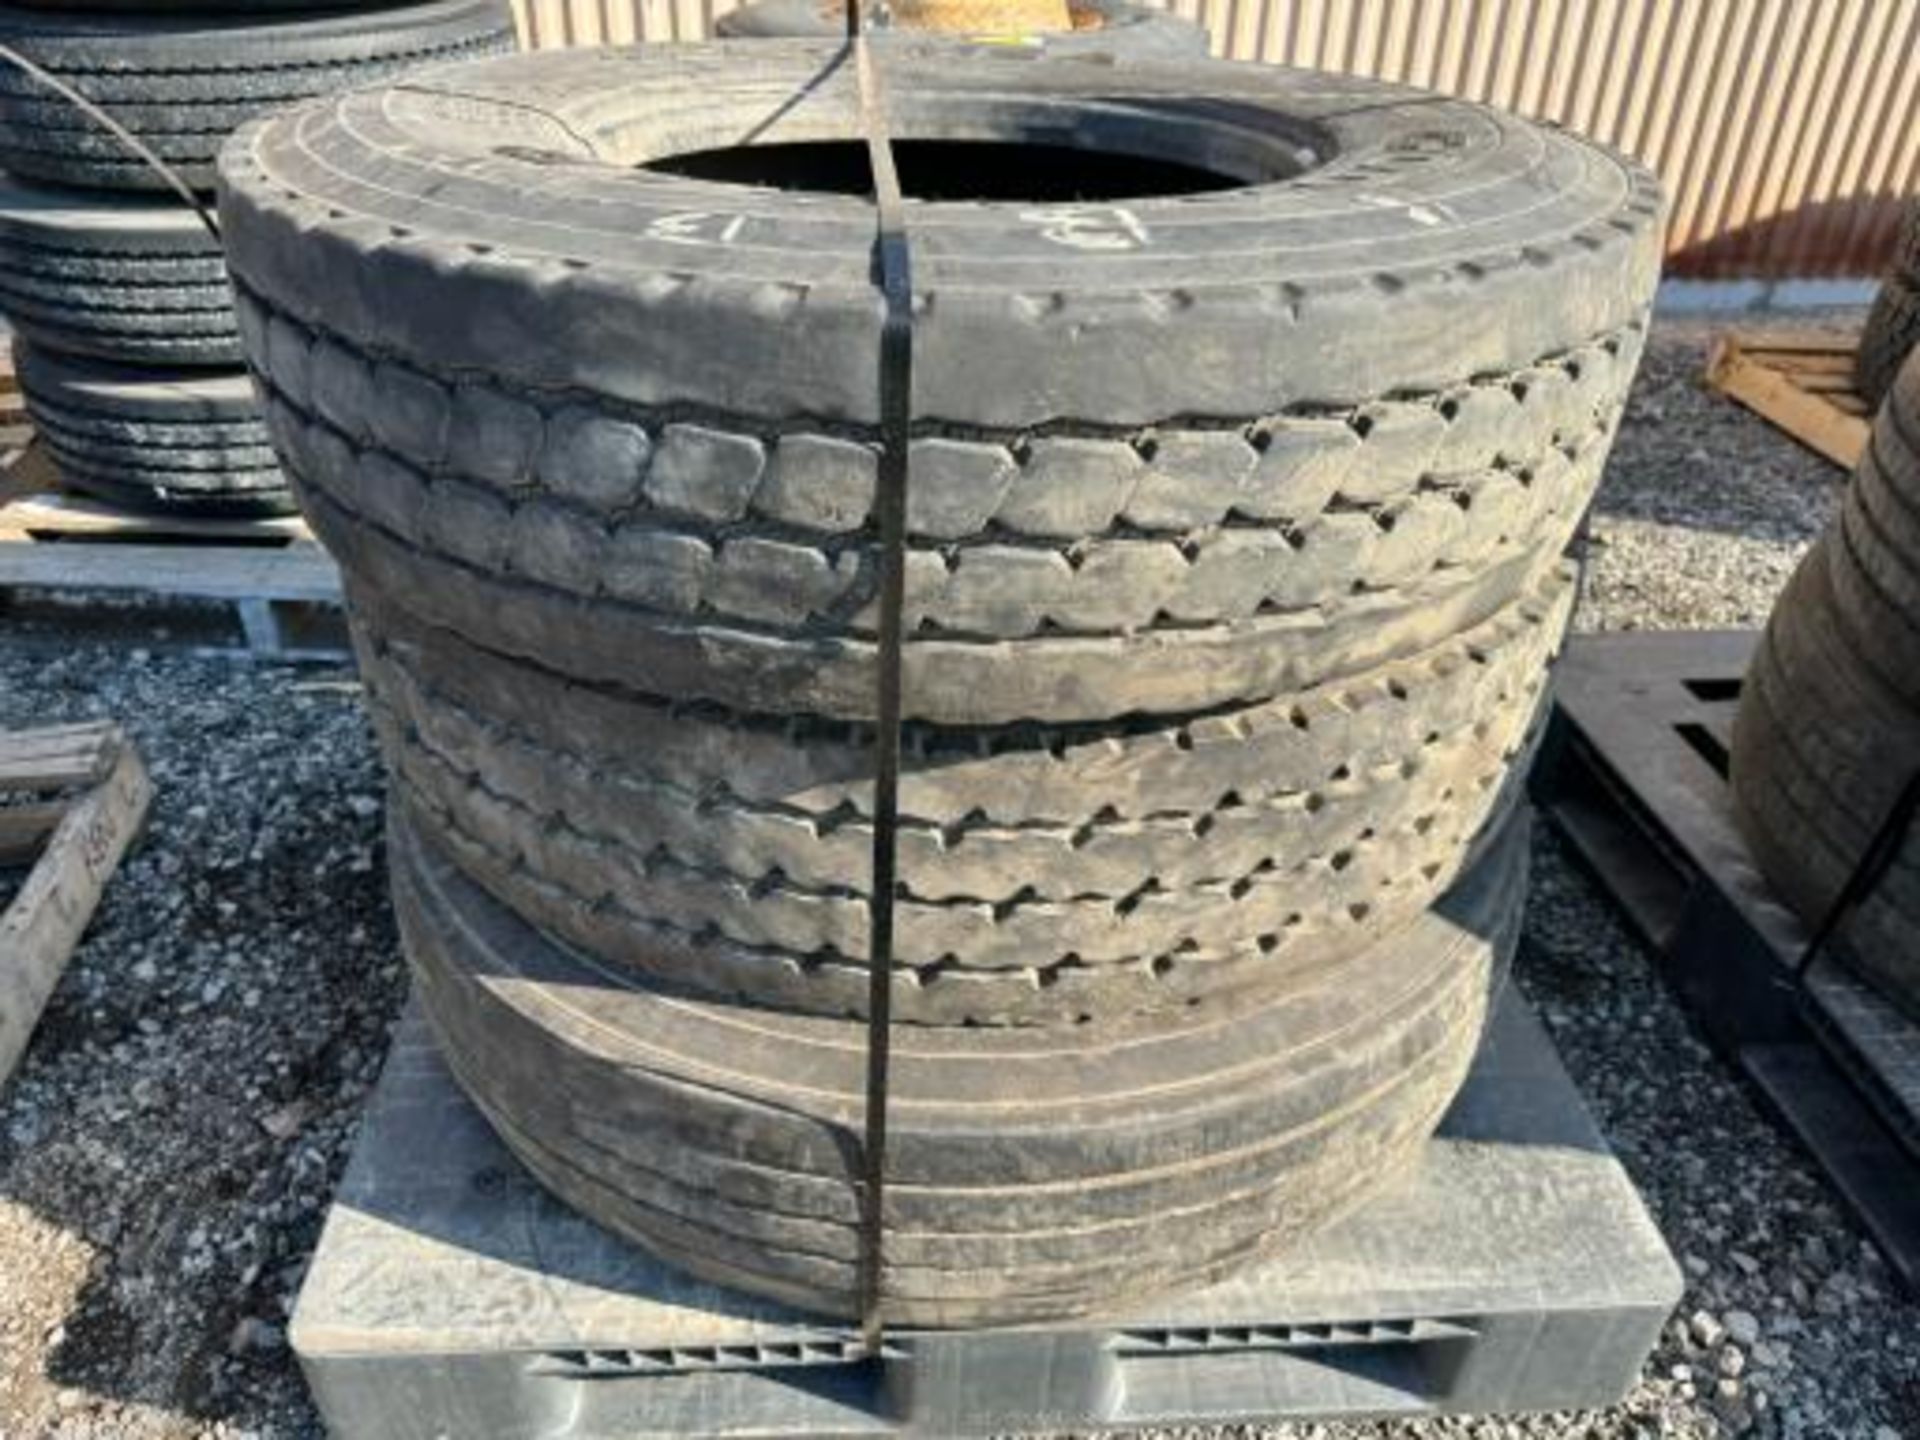 3 Goodyear G287 MSA 12R 22.5 Tires - Image 3 of 3